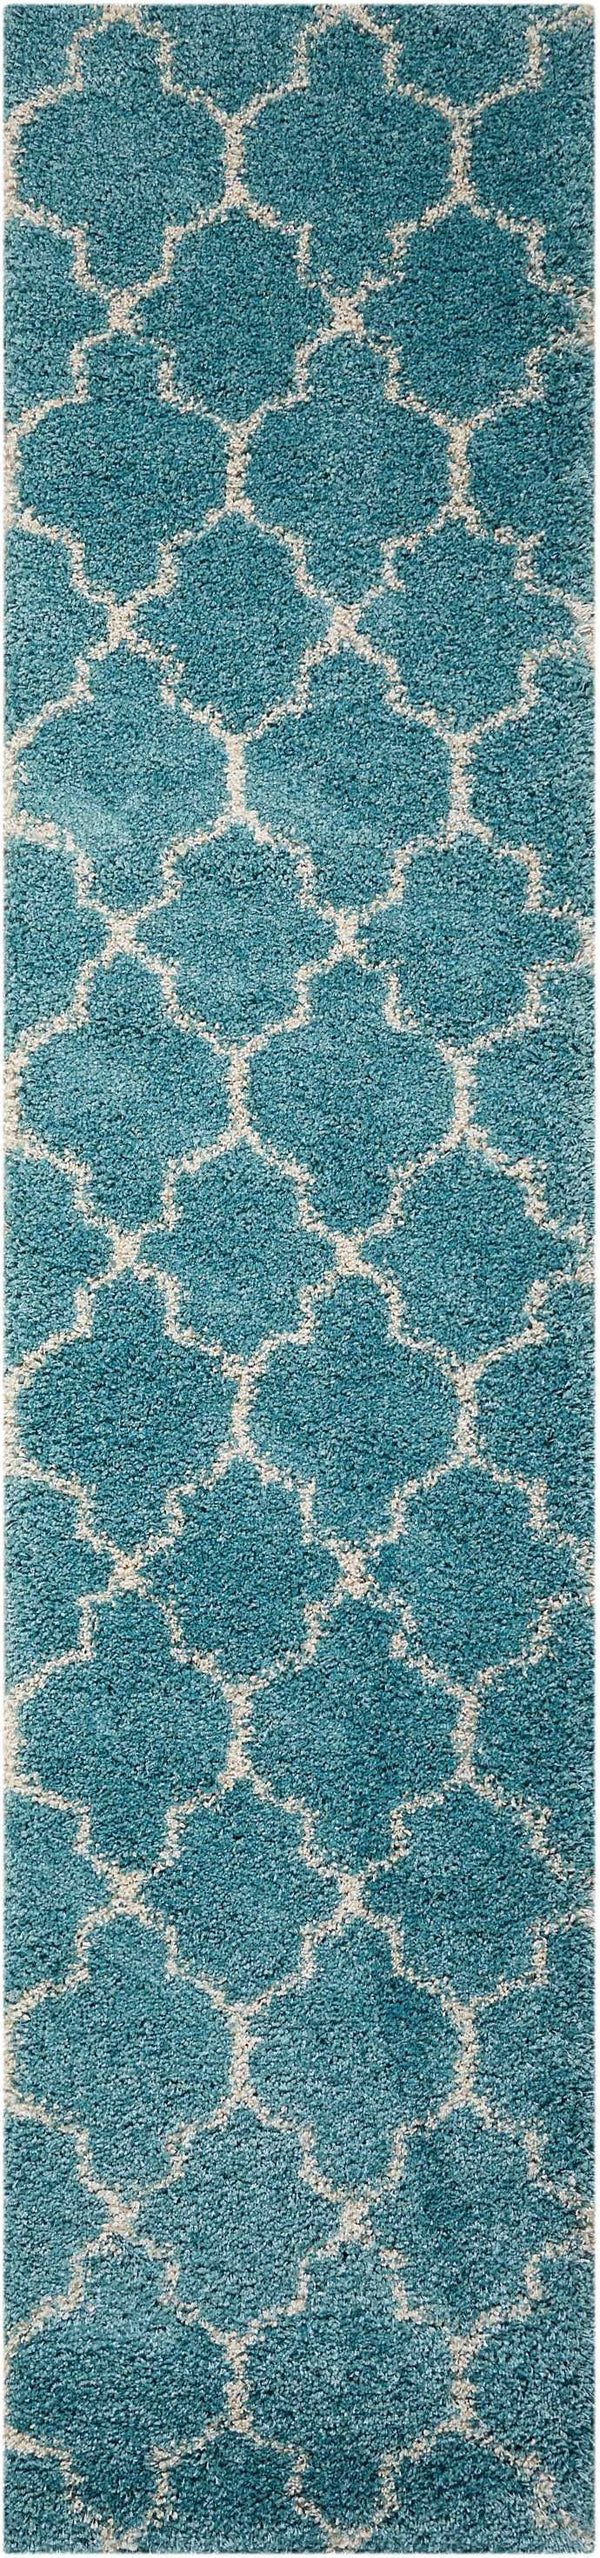 Runners Nourison Shags Shag Rugs Amore Collection By Nourison Amor2 Aqua Unique Shapes and Sizes